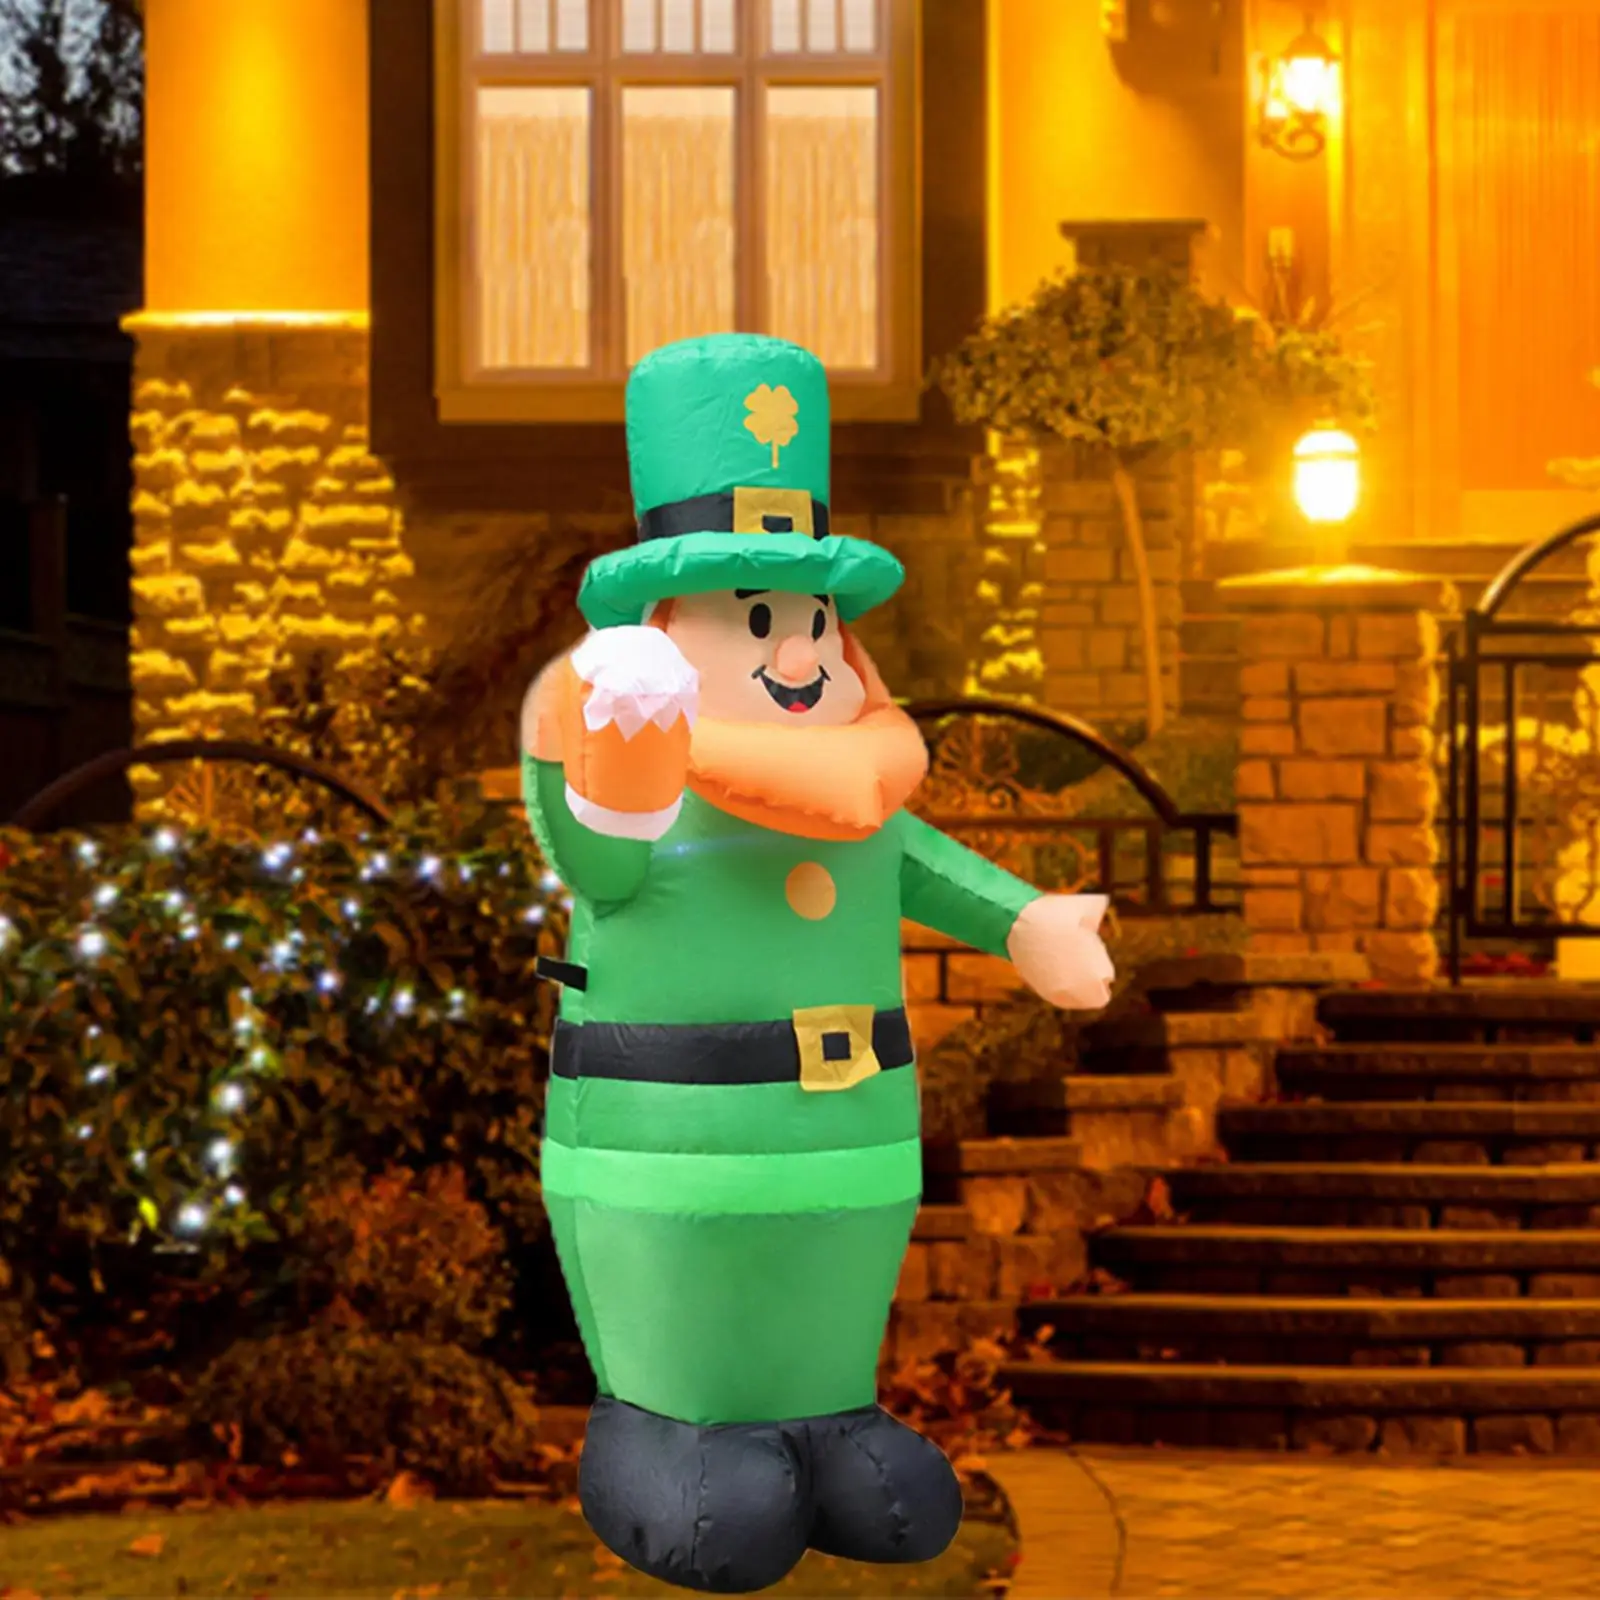 1M Inflatable Toys Gift Inflatable Decor Decor Doll ST Patricks Day Inflatable Decor for Lawn Holiday Party Courtyard EU Adaptor